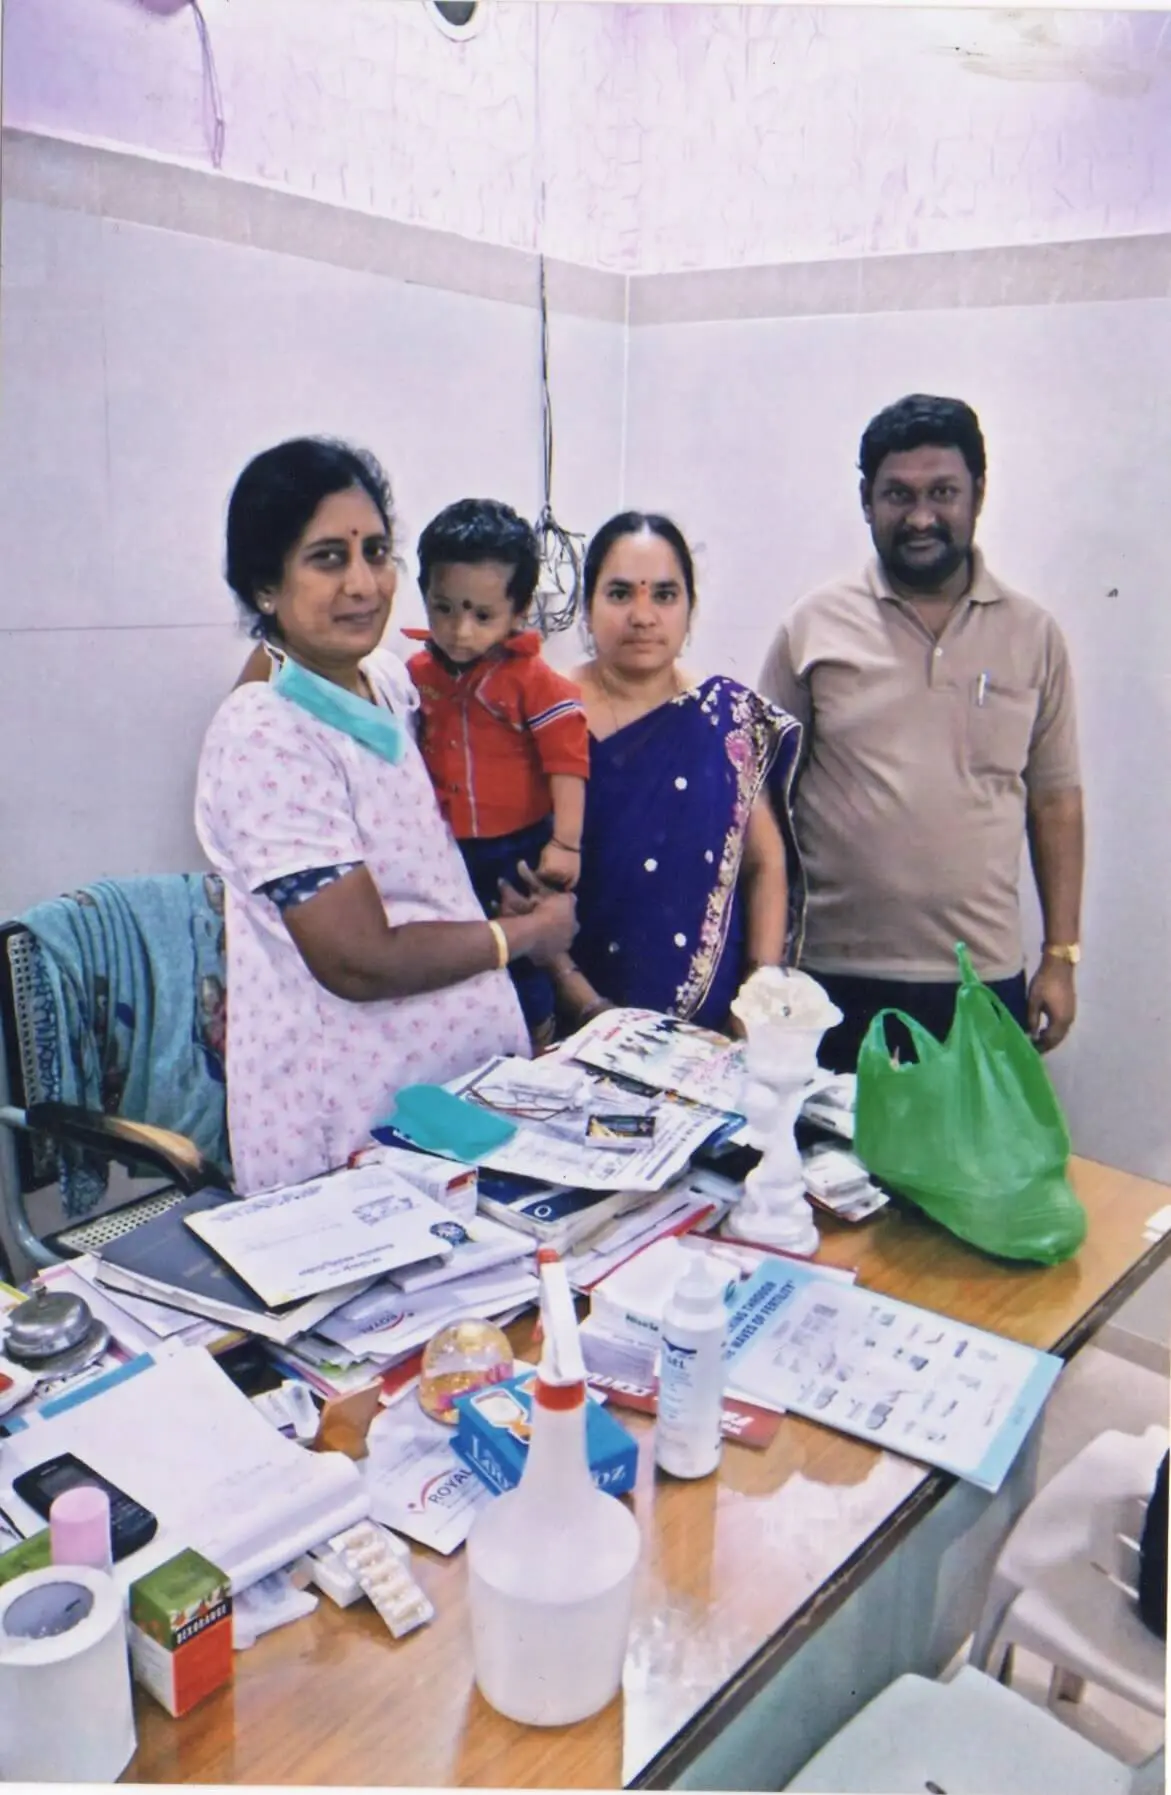 Left to Right, all standing, Dr. Rama Devi Kolli holding a young boy; the mother; the father, both smiling. This boy was born through ICSI at Karthika Datta's IVF.